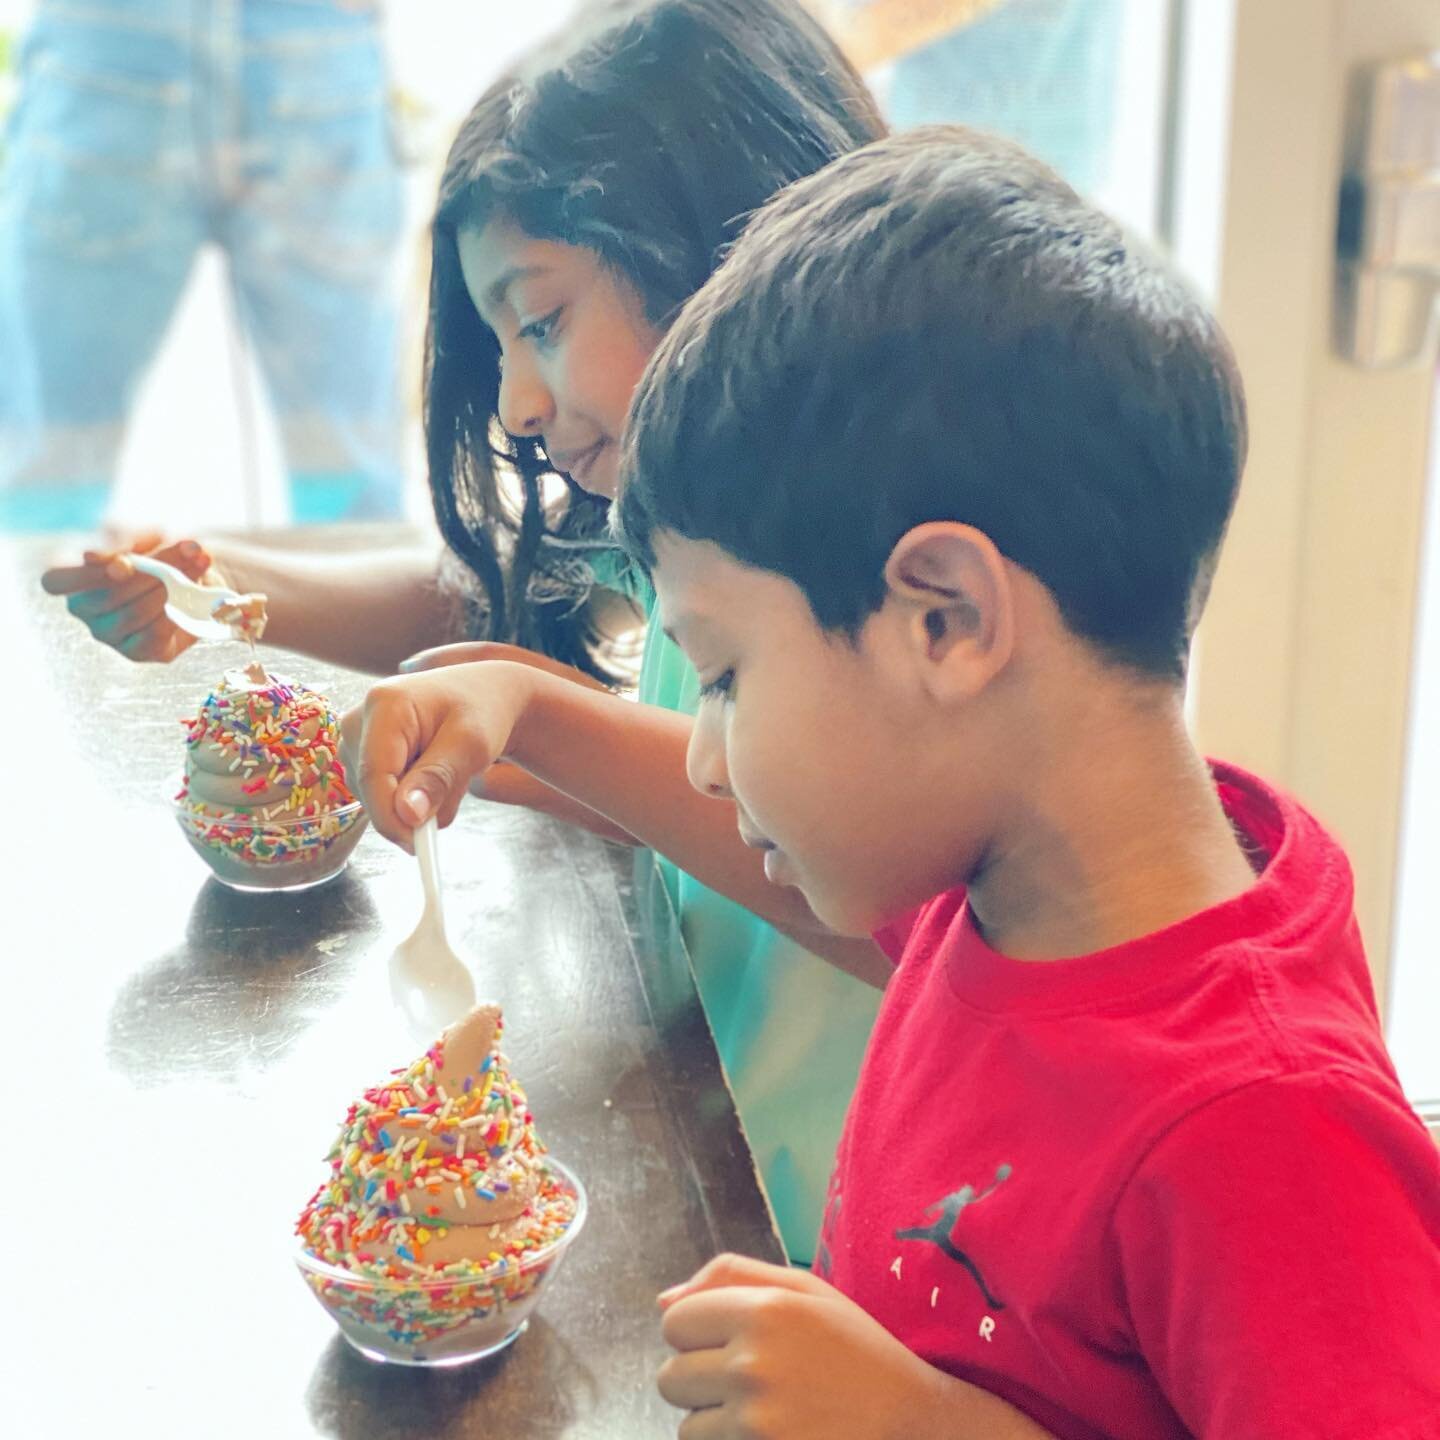 I don&rsquo;t really like ice cream, but these two love it. When we were looking for a new house, we knew there had to be a @braumsicecream_dairy nearby. We always order ice cream when we go out, because you know&hellip;meltdowns. 😩🤣
He orders vani